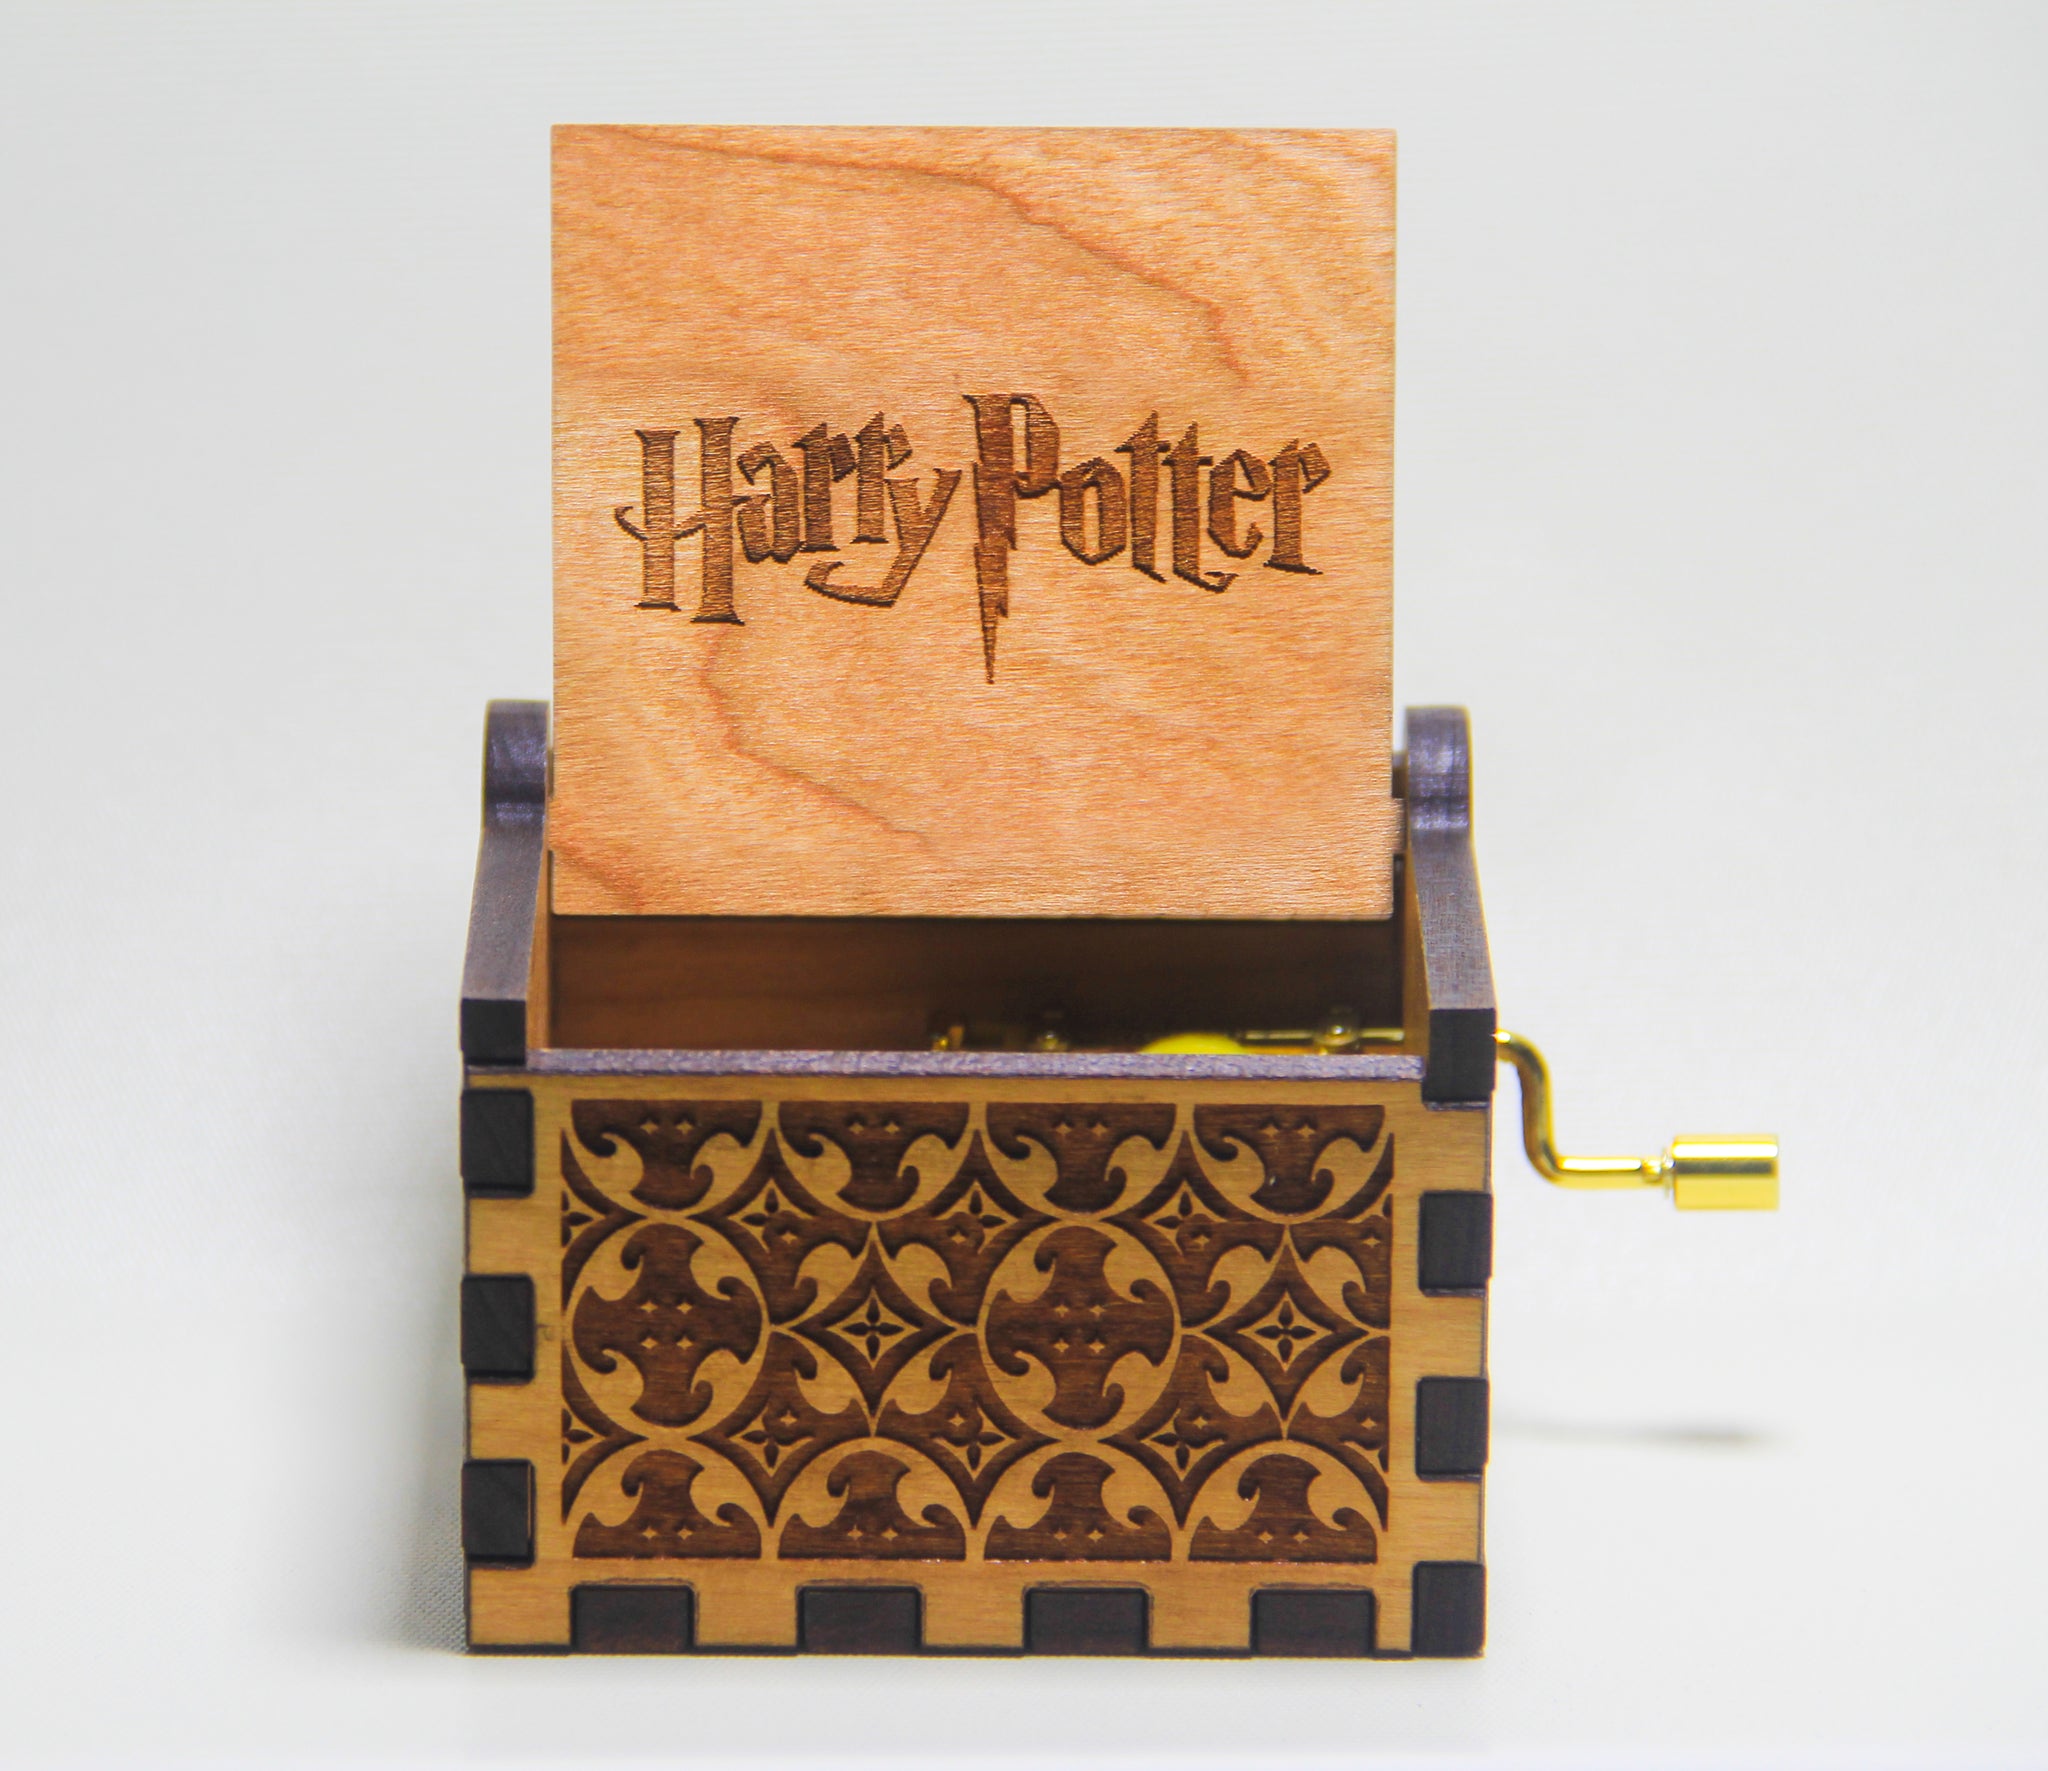 Hand Cranked Wooden Music Box - Harry Potter Collectibles